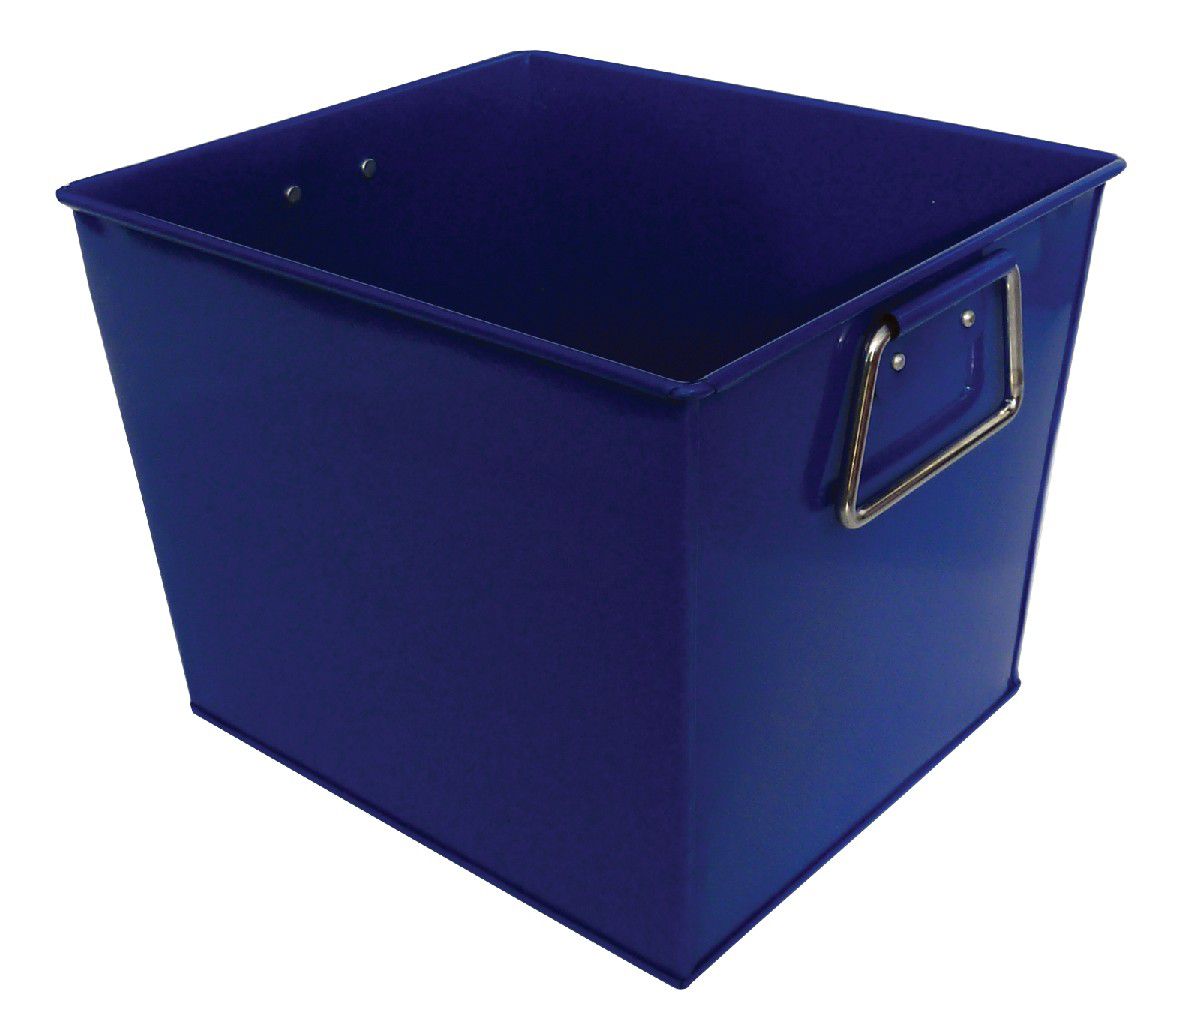 Blue Metal Bucket - Square 99232W by Organize It All